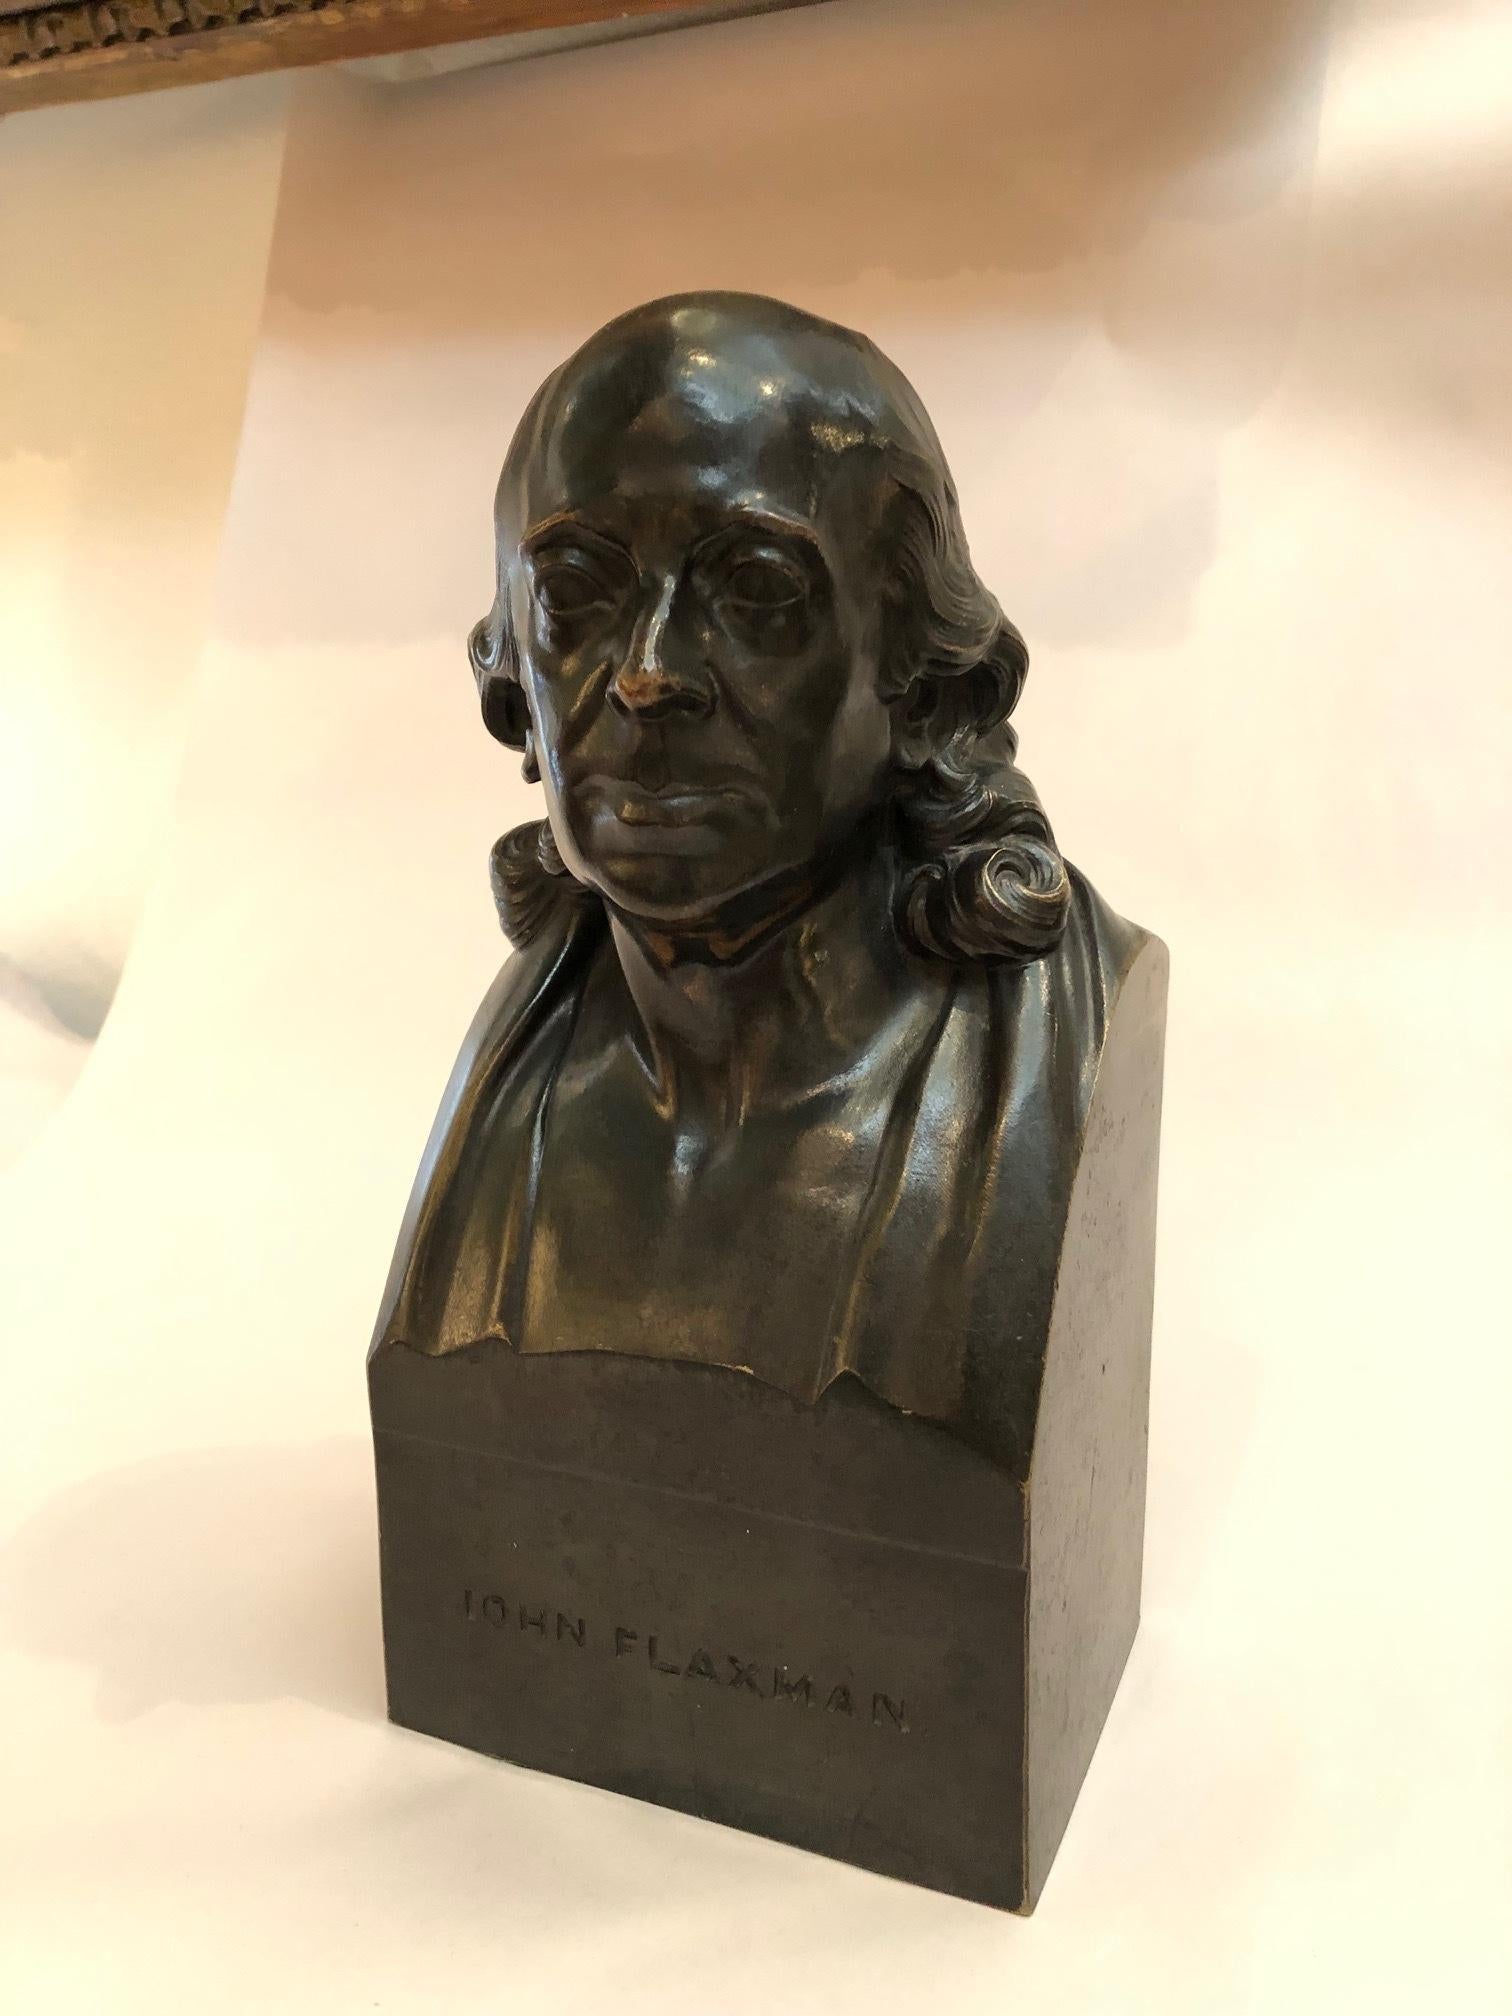 John Flaxman (1755-1826) bronze bust published by S. Parker after the works by sculptor Samuel Joseph (1791-1850), no marks on this bust, England, 19th century

originally with a 